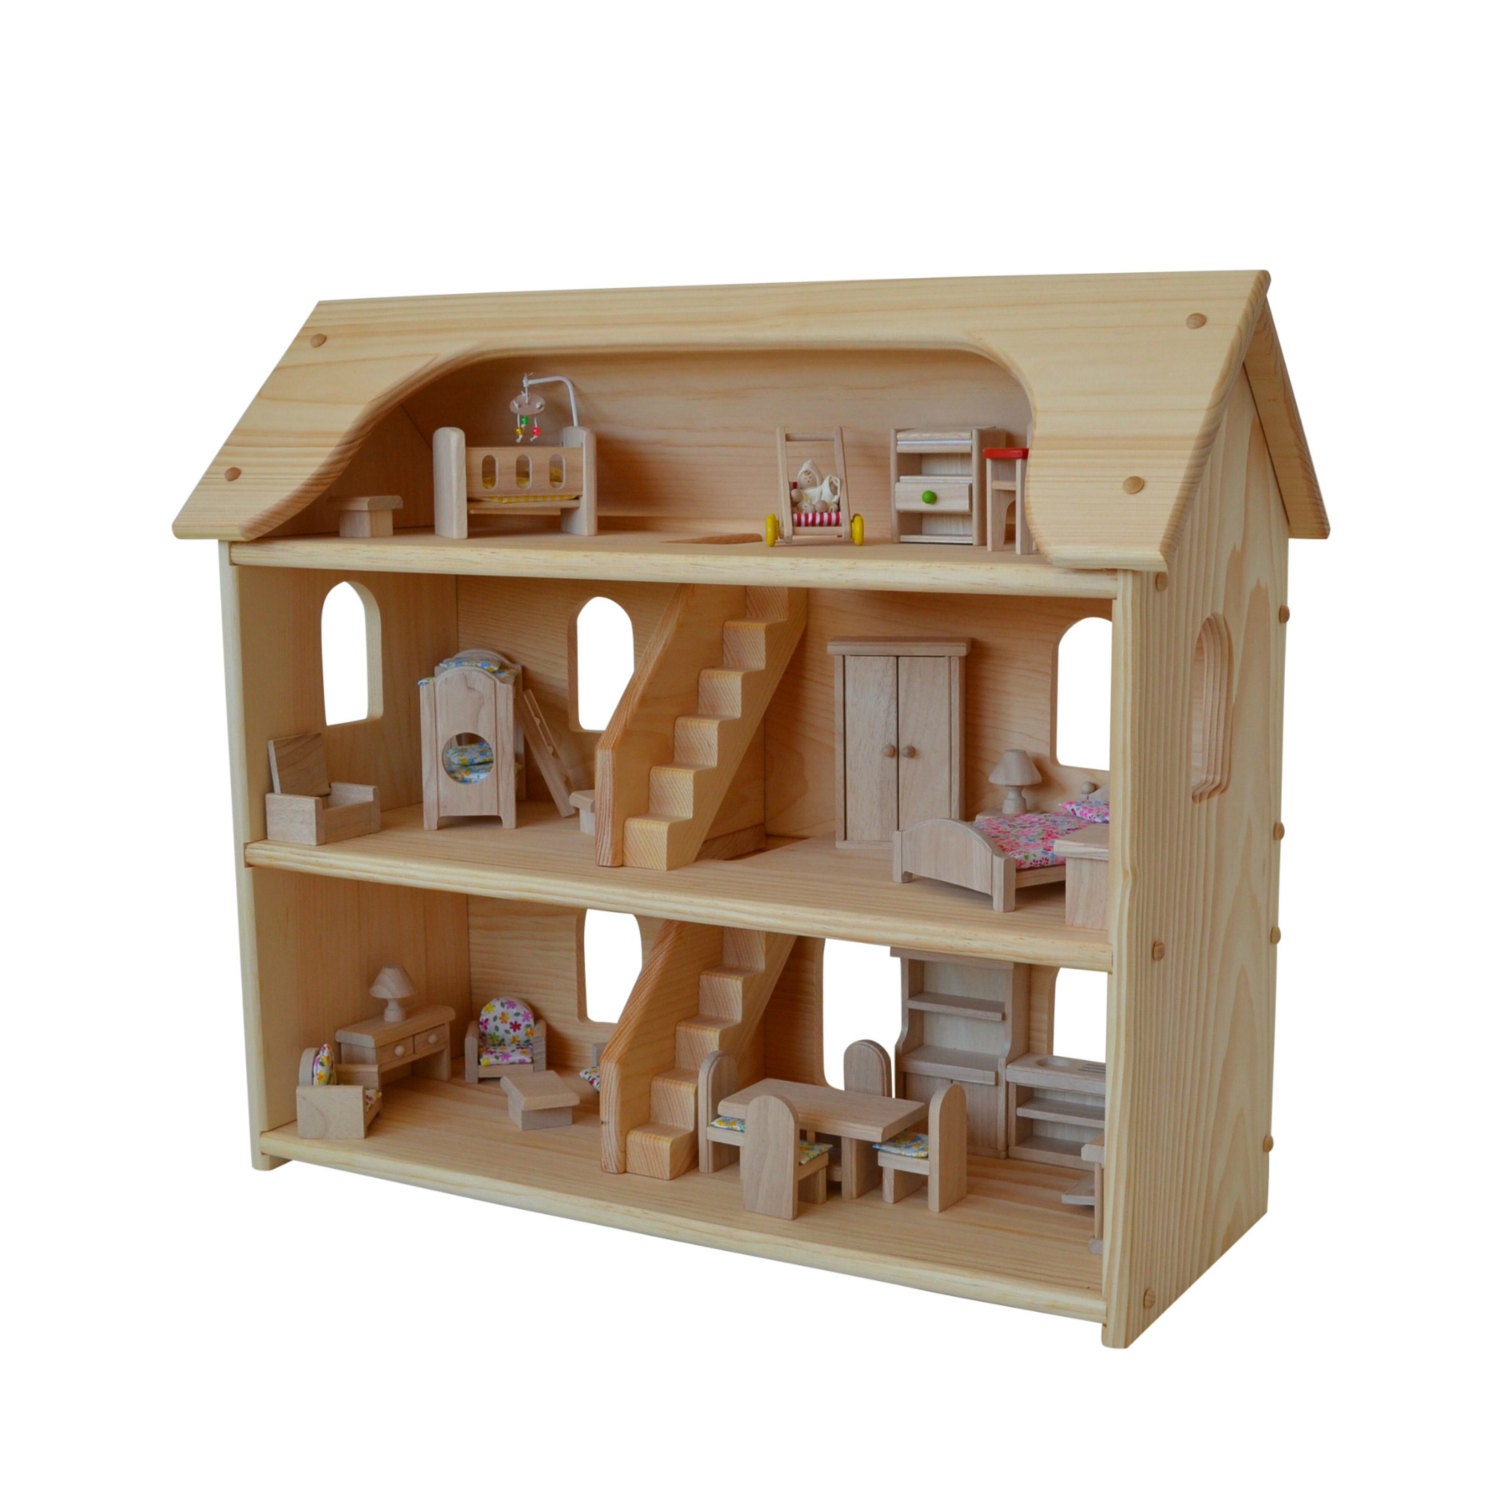 Handcrafted Natural Wooden Toy Dollhouse Furniture Set-Waldorf